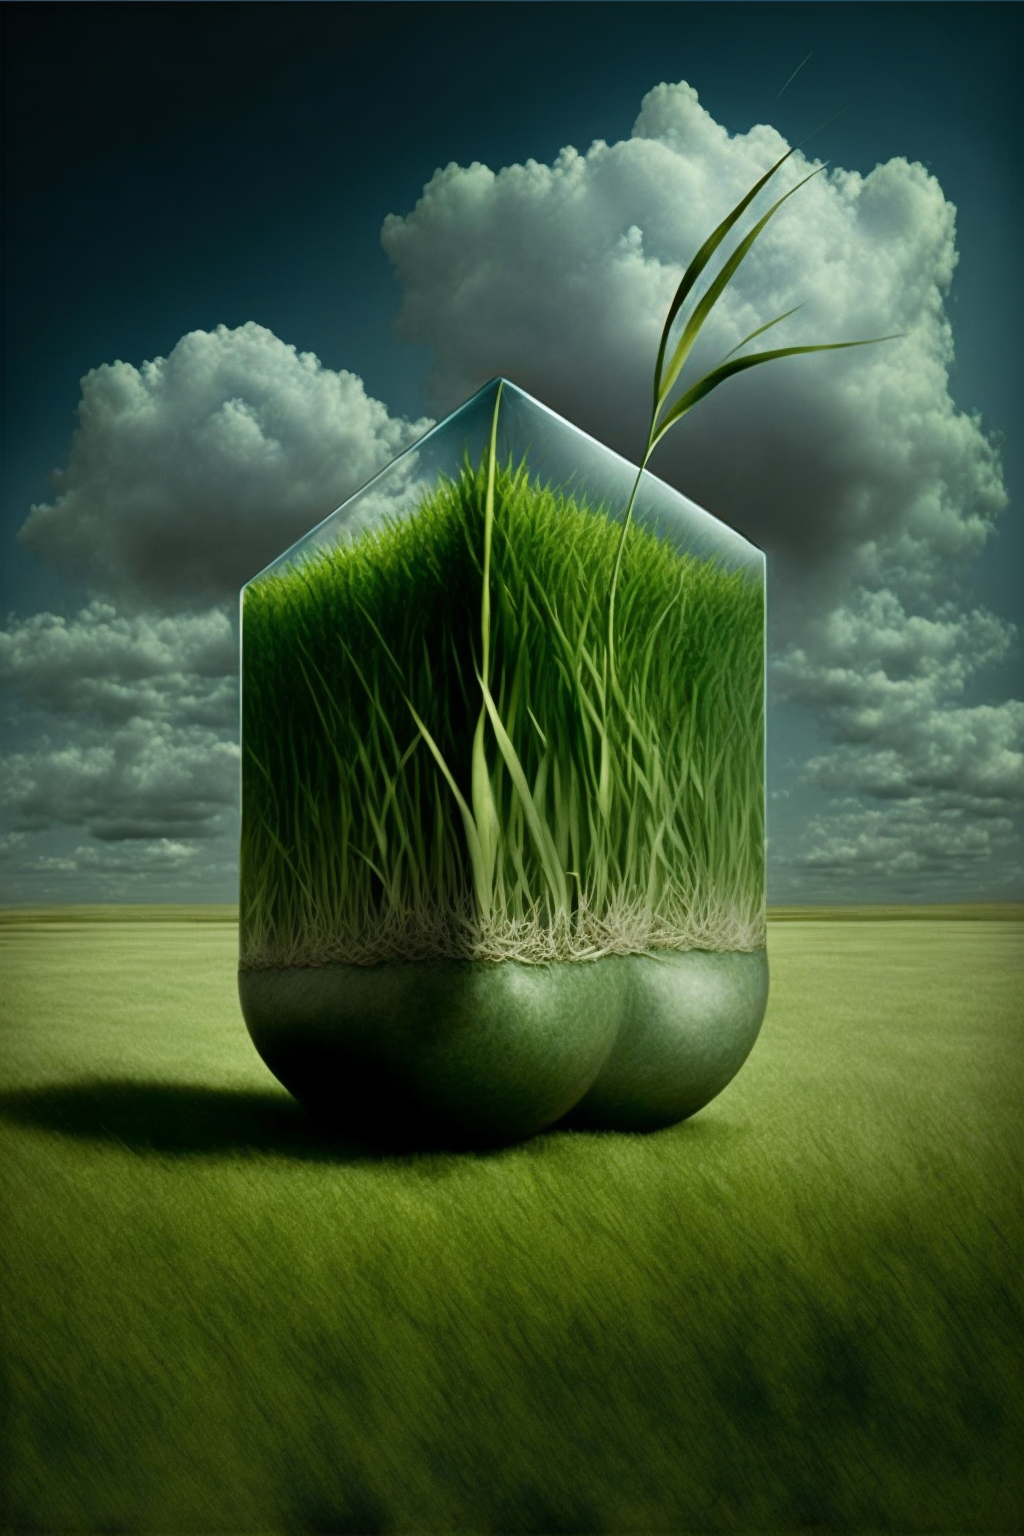 Grass in the style of Surrealist-Socialist Post-Modern Classicism 1